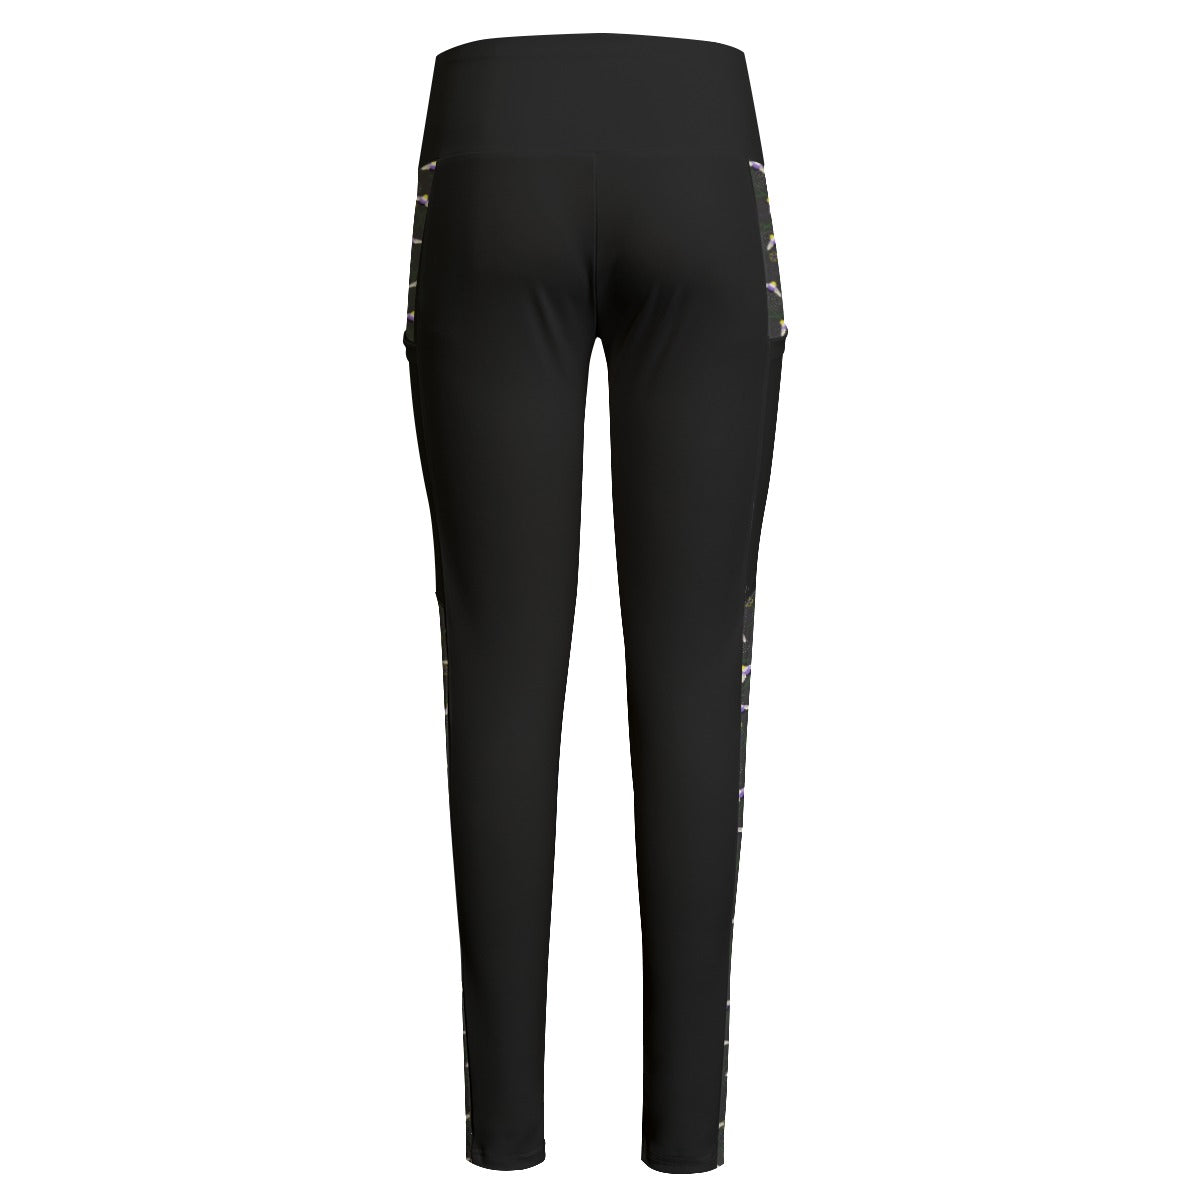 High Waist Leggings with Bumblebee and Vine Trellis Pattern Accent and Side Pockets | Choose Your Colourway